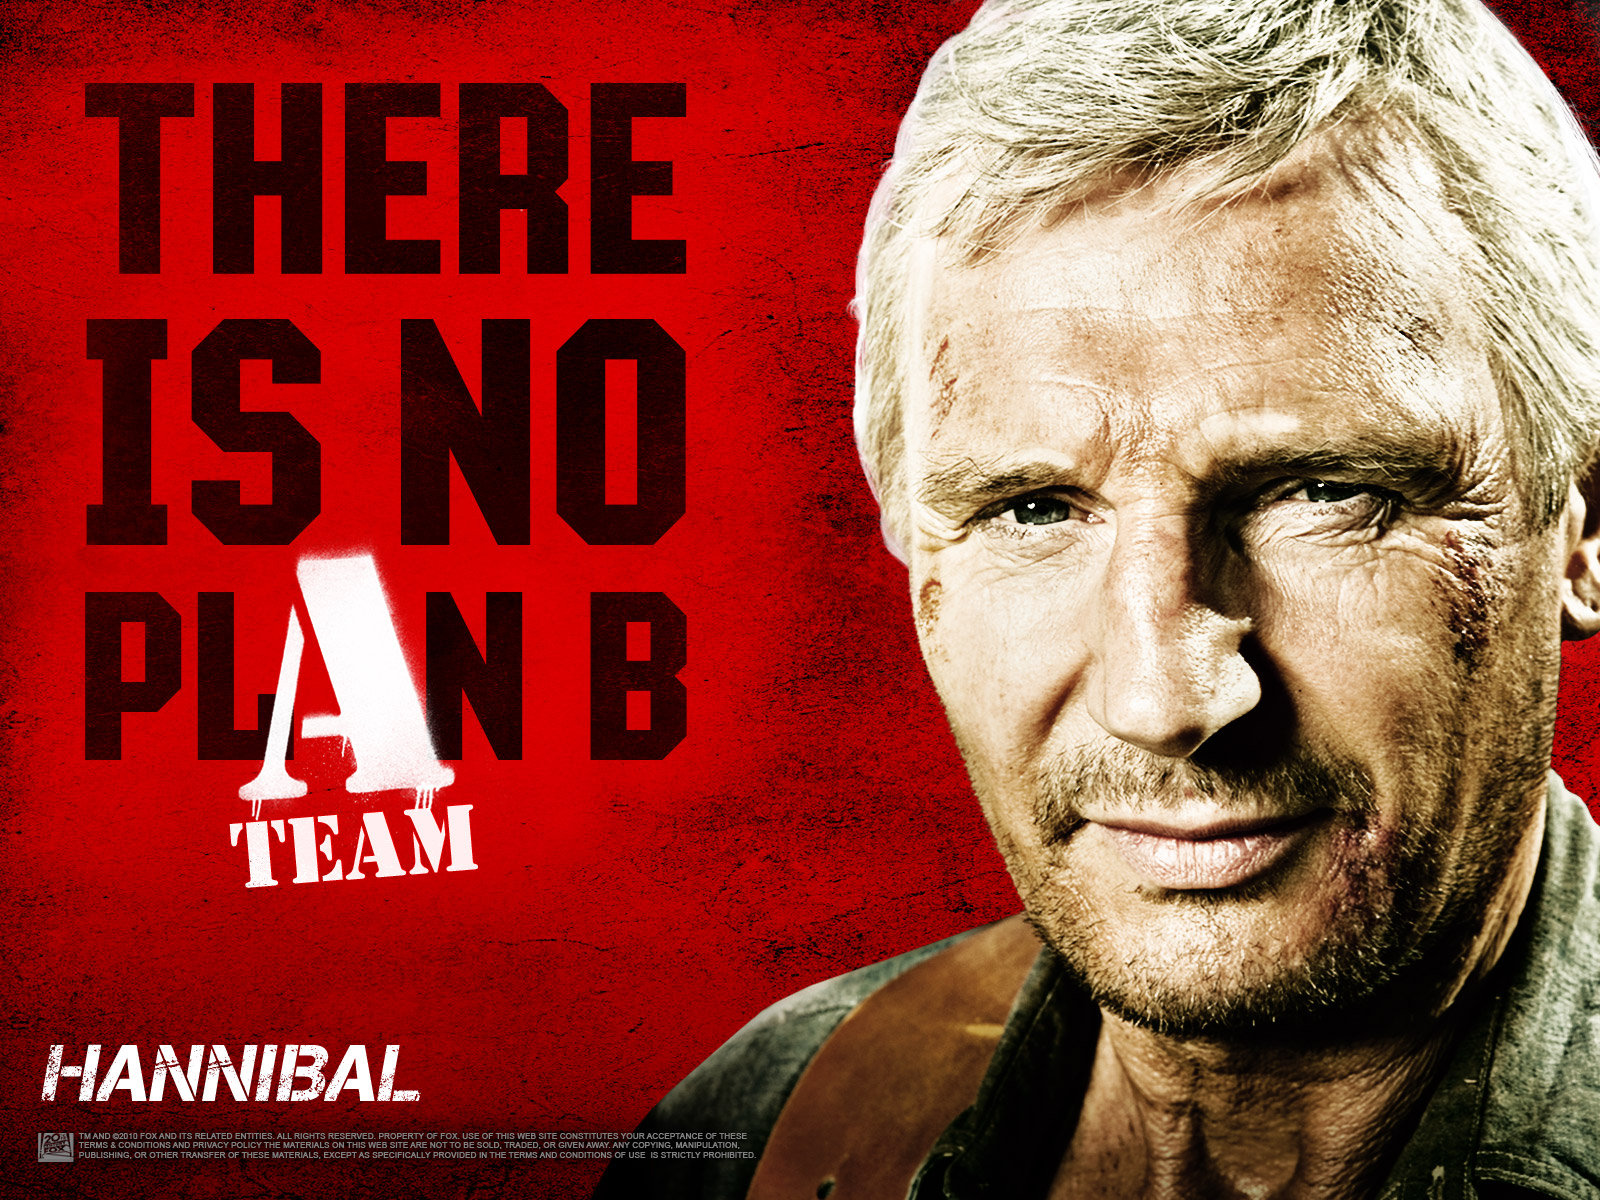 Movie The A-Team HD Wallpaper | Background Image